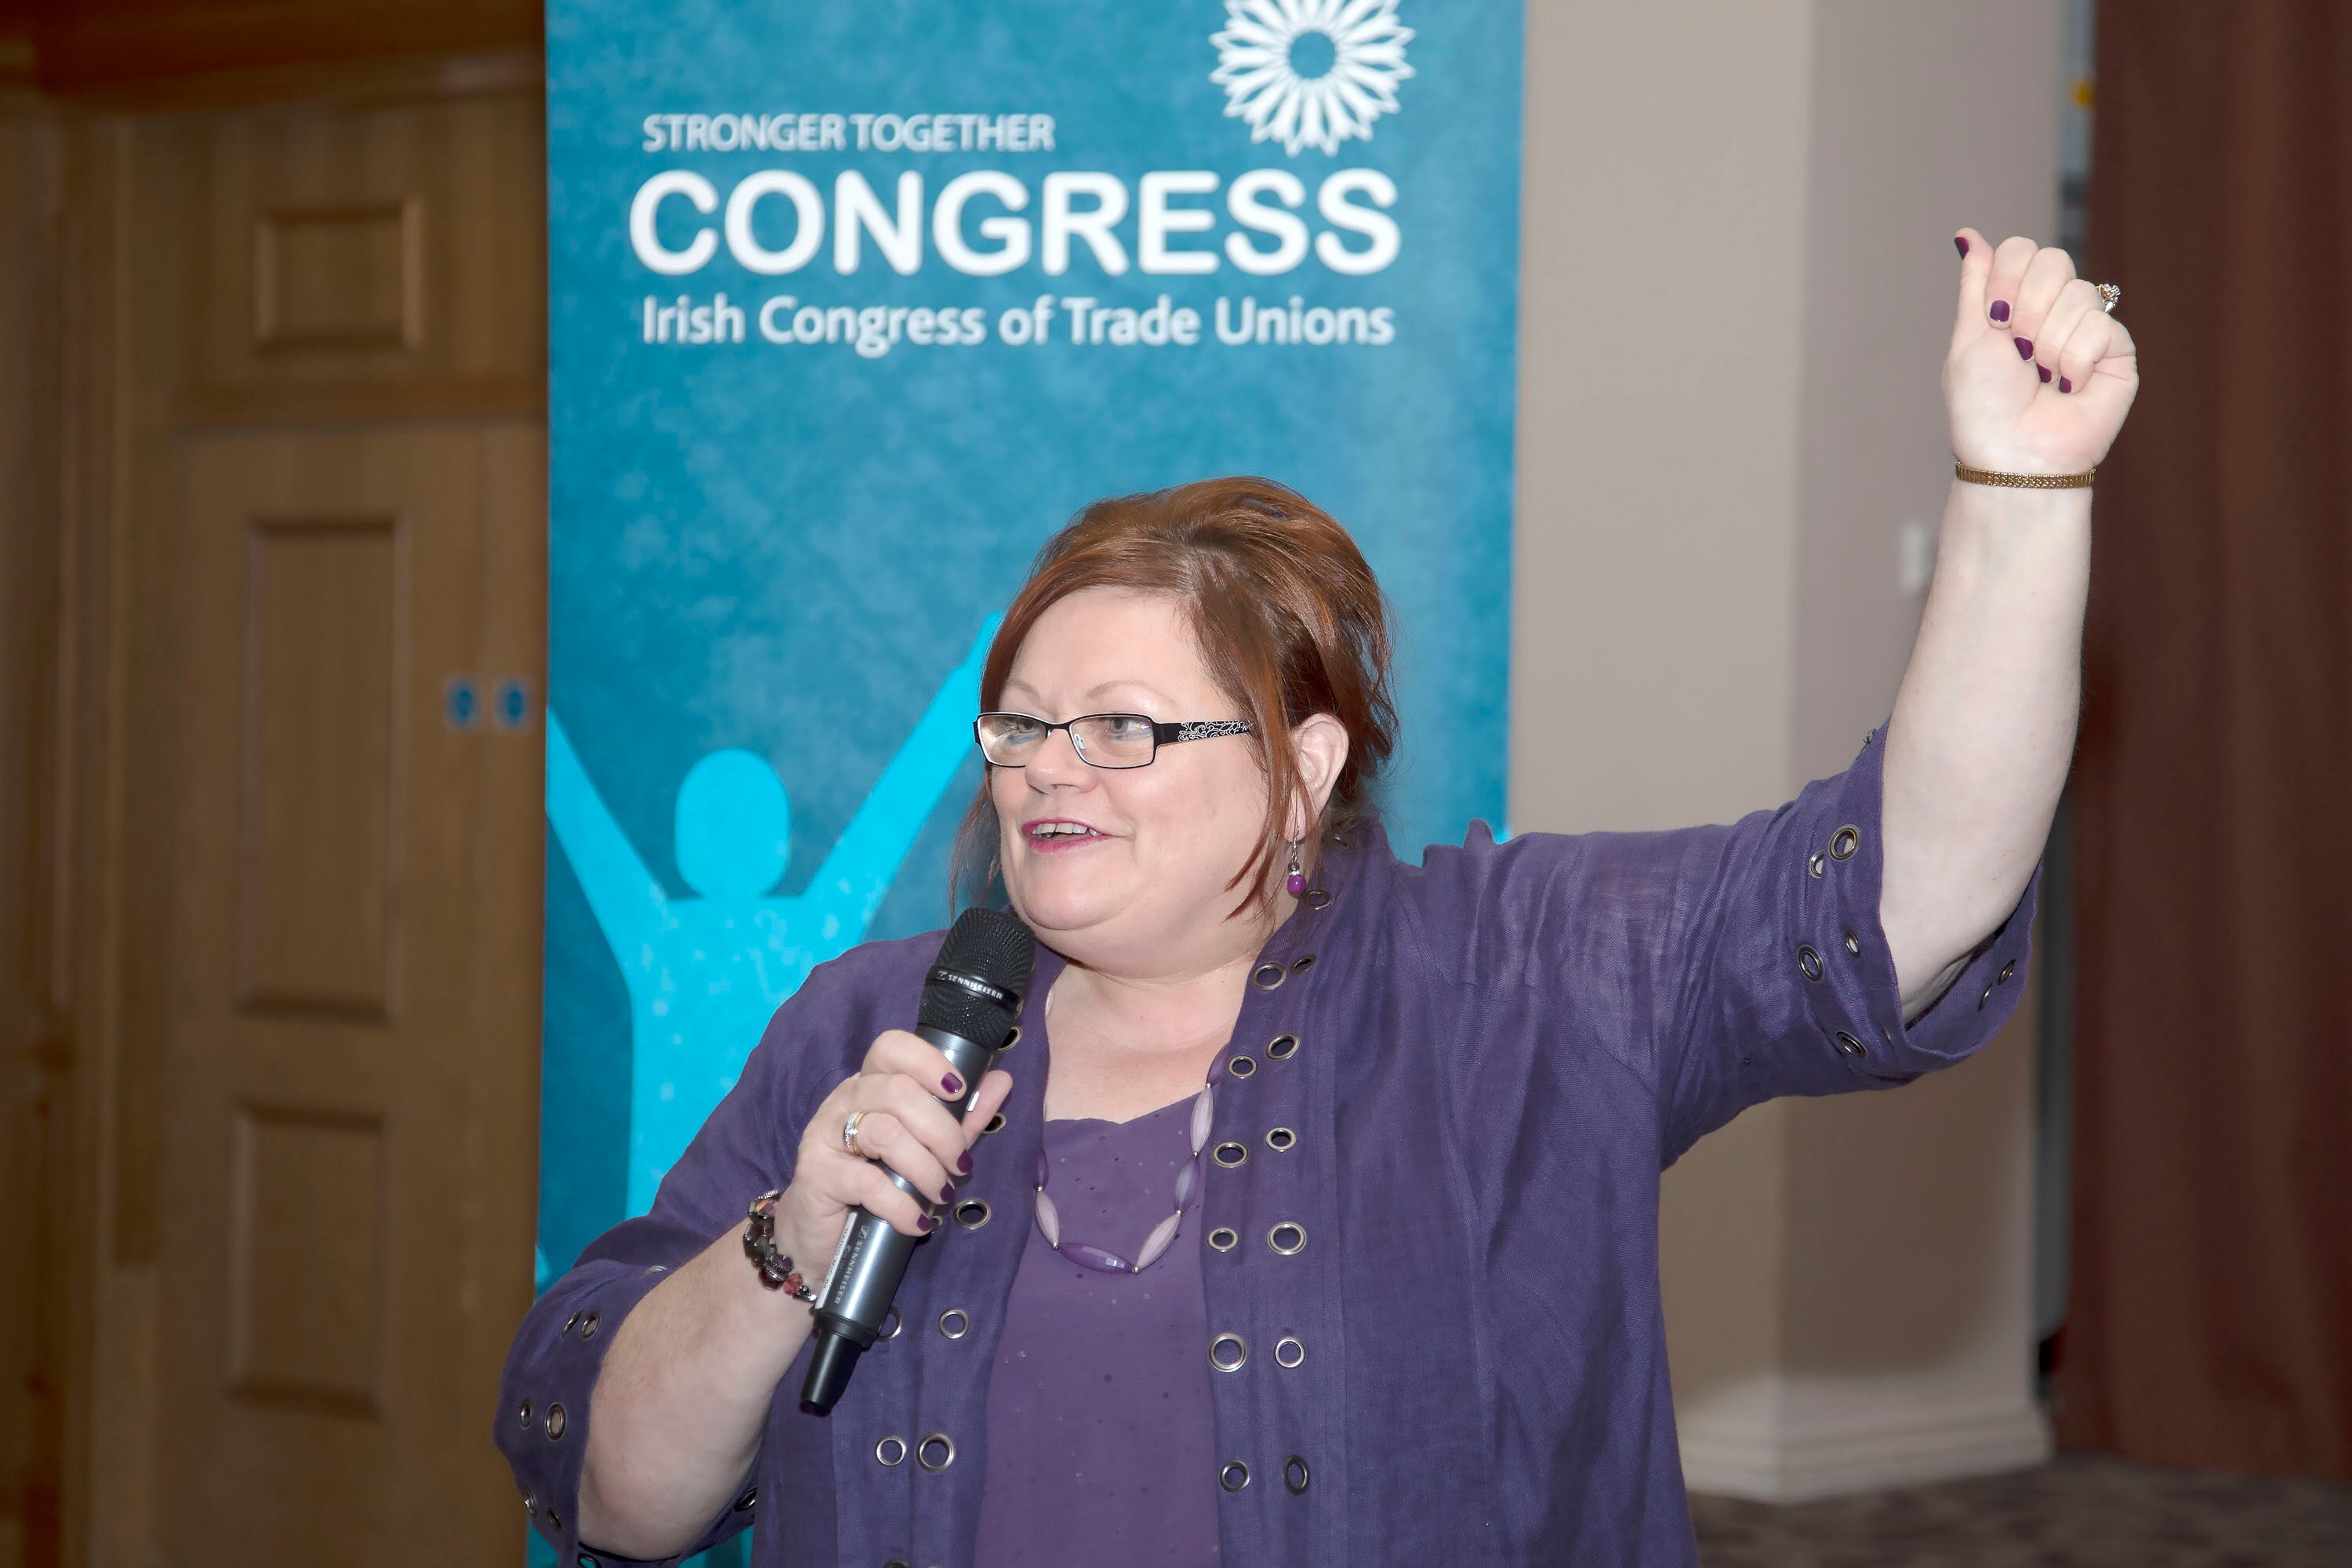 Margaret Coughlan, a leading Fórsa activist who chairs the ICTU Women’s Committee.